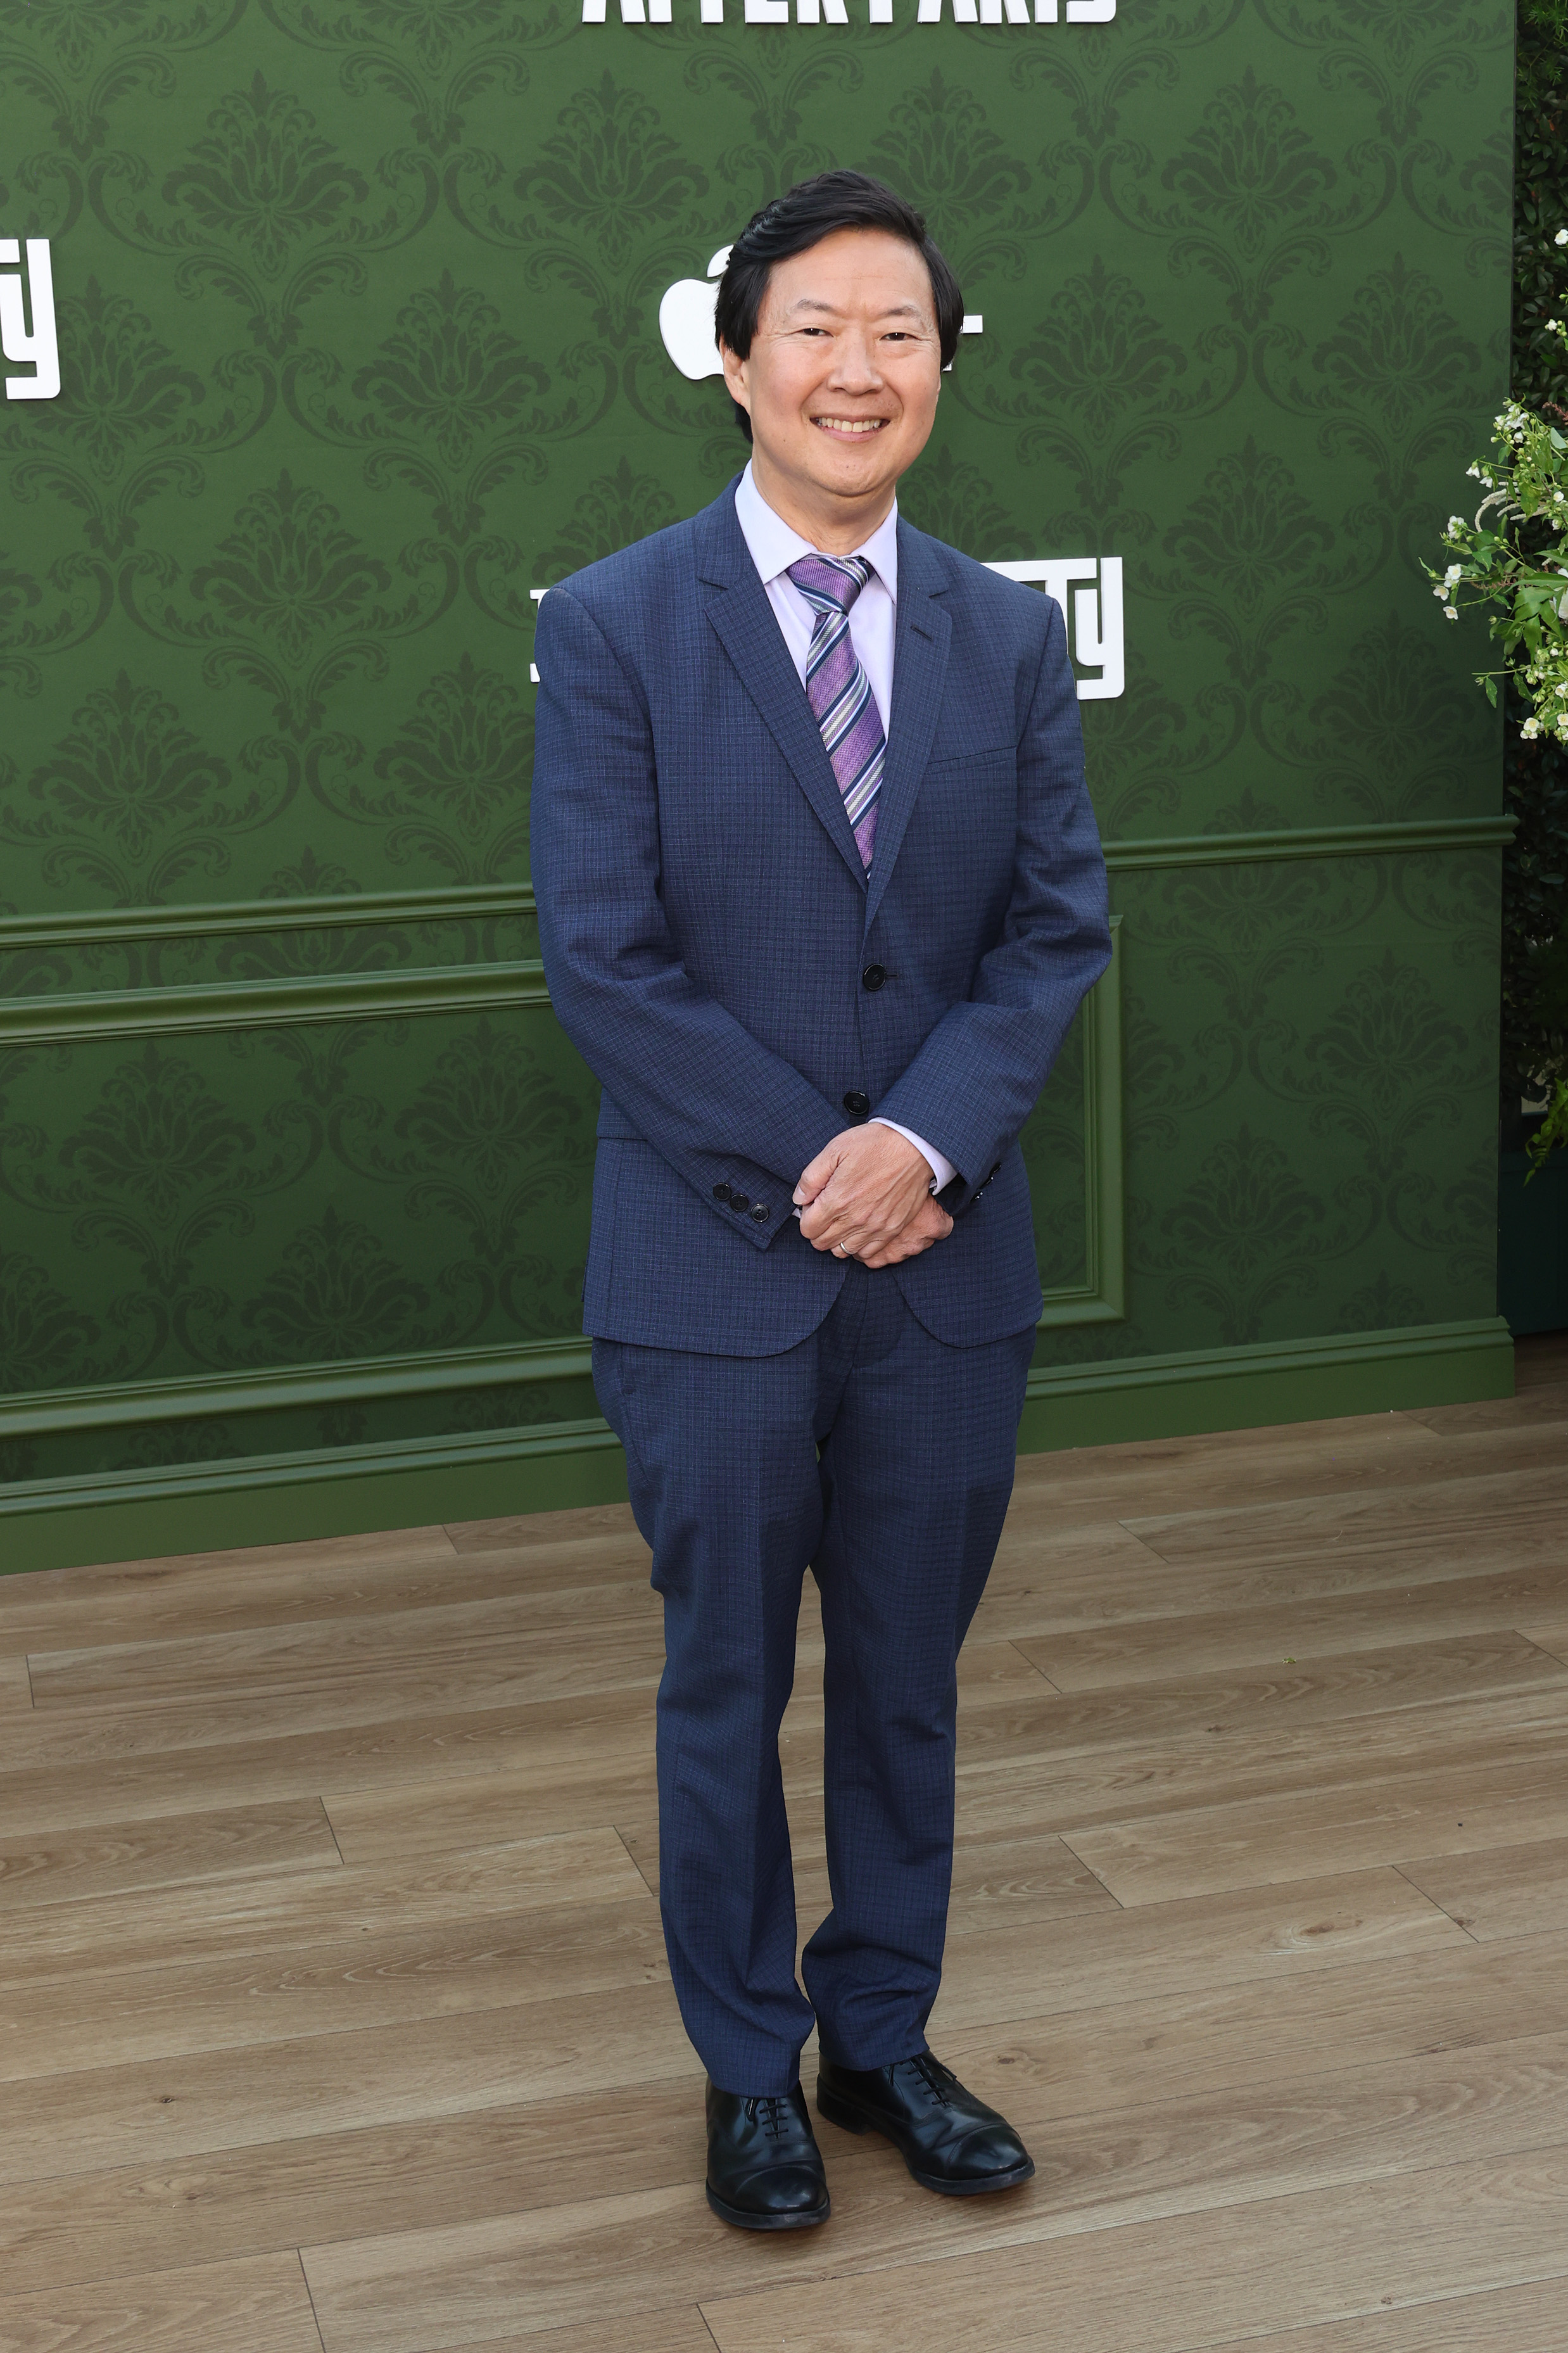 Ken Jeong attends the red carpet premiere for Apple TV+'s "The Afterparty" at Regency Bruin Theatre on June 28, 2023, in Los Angeles, California. | Source: Getty Images